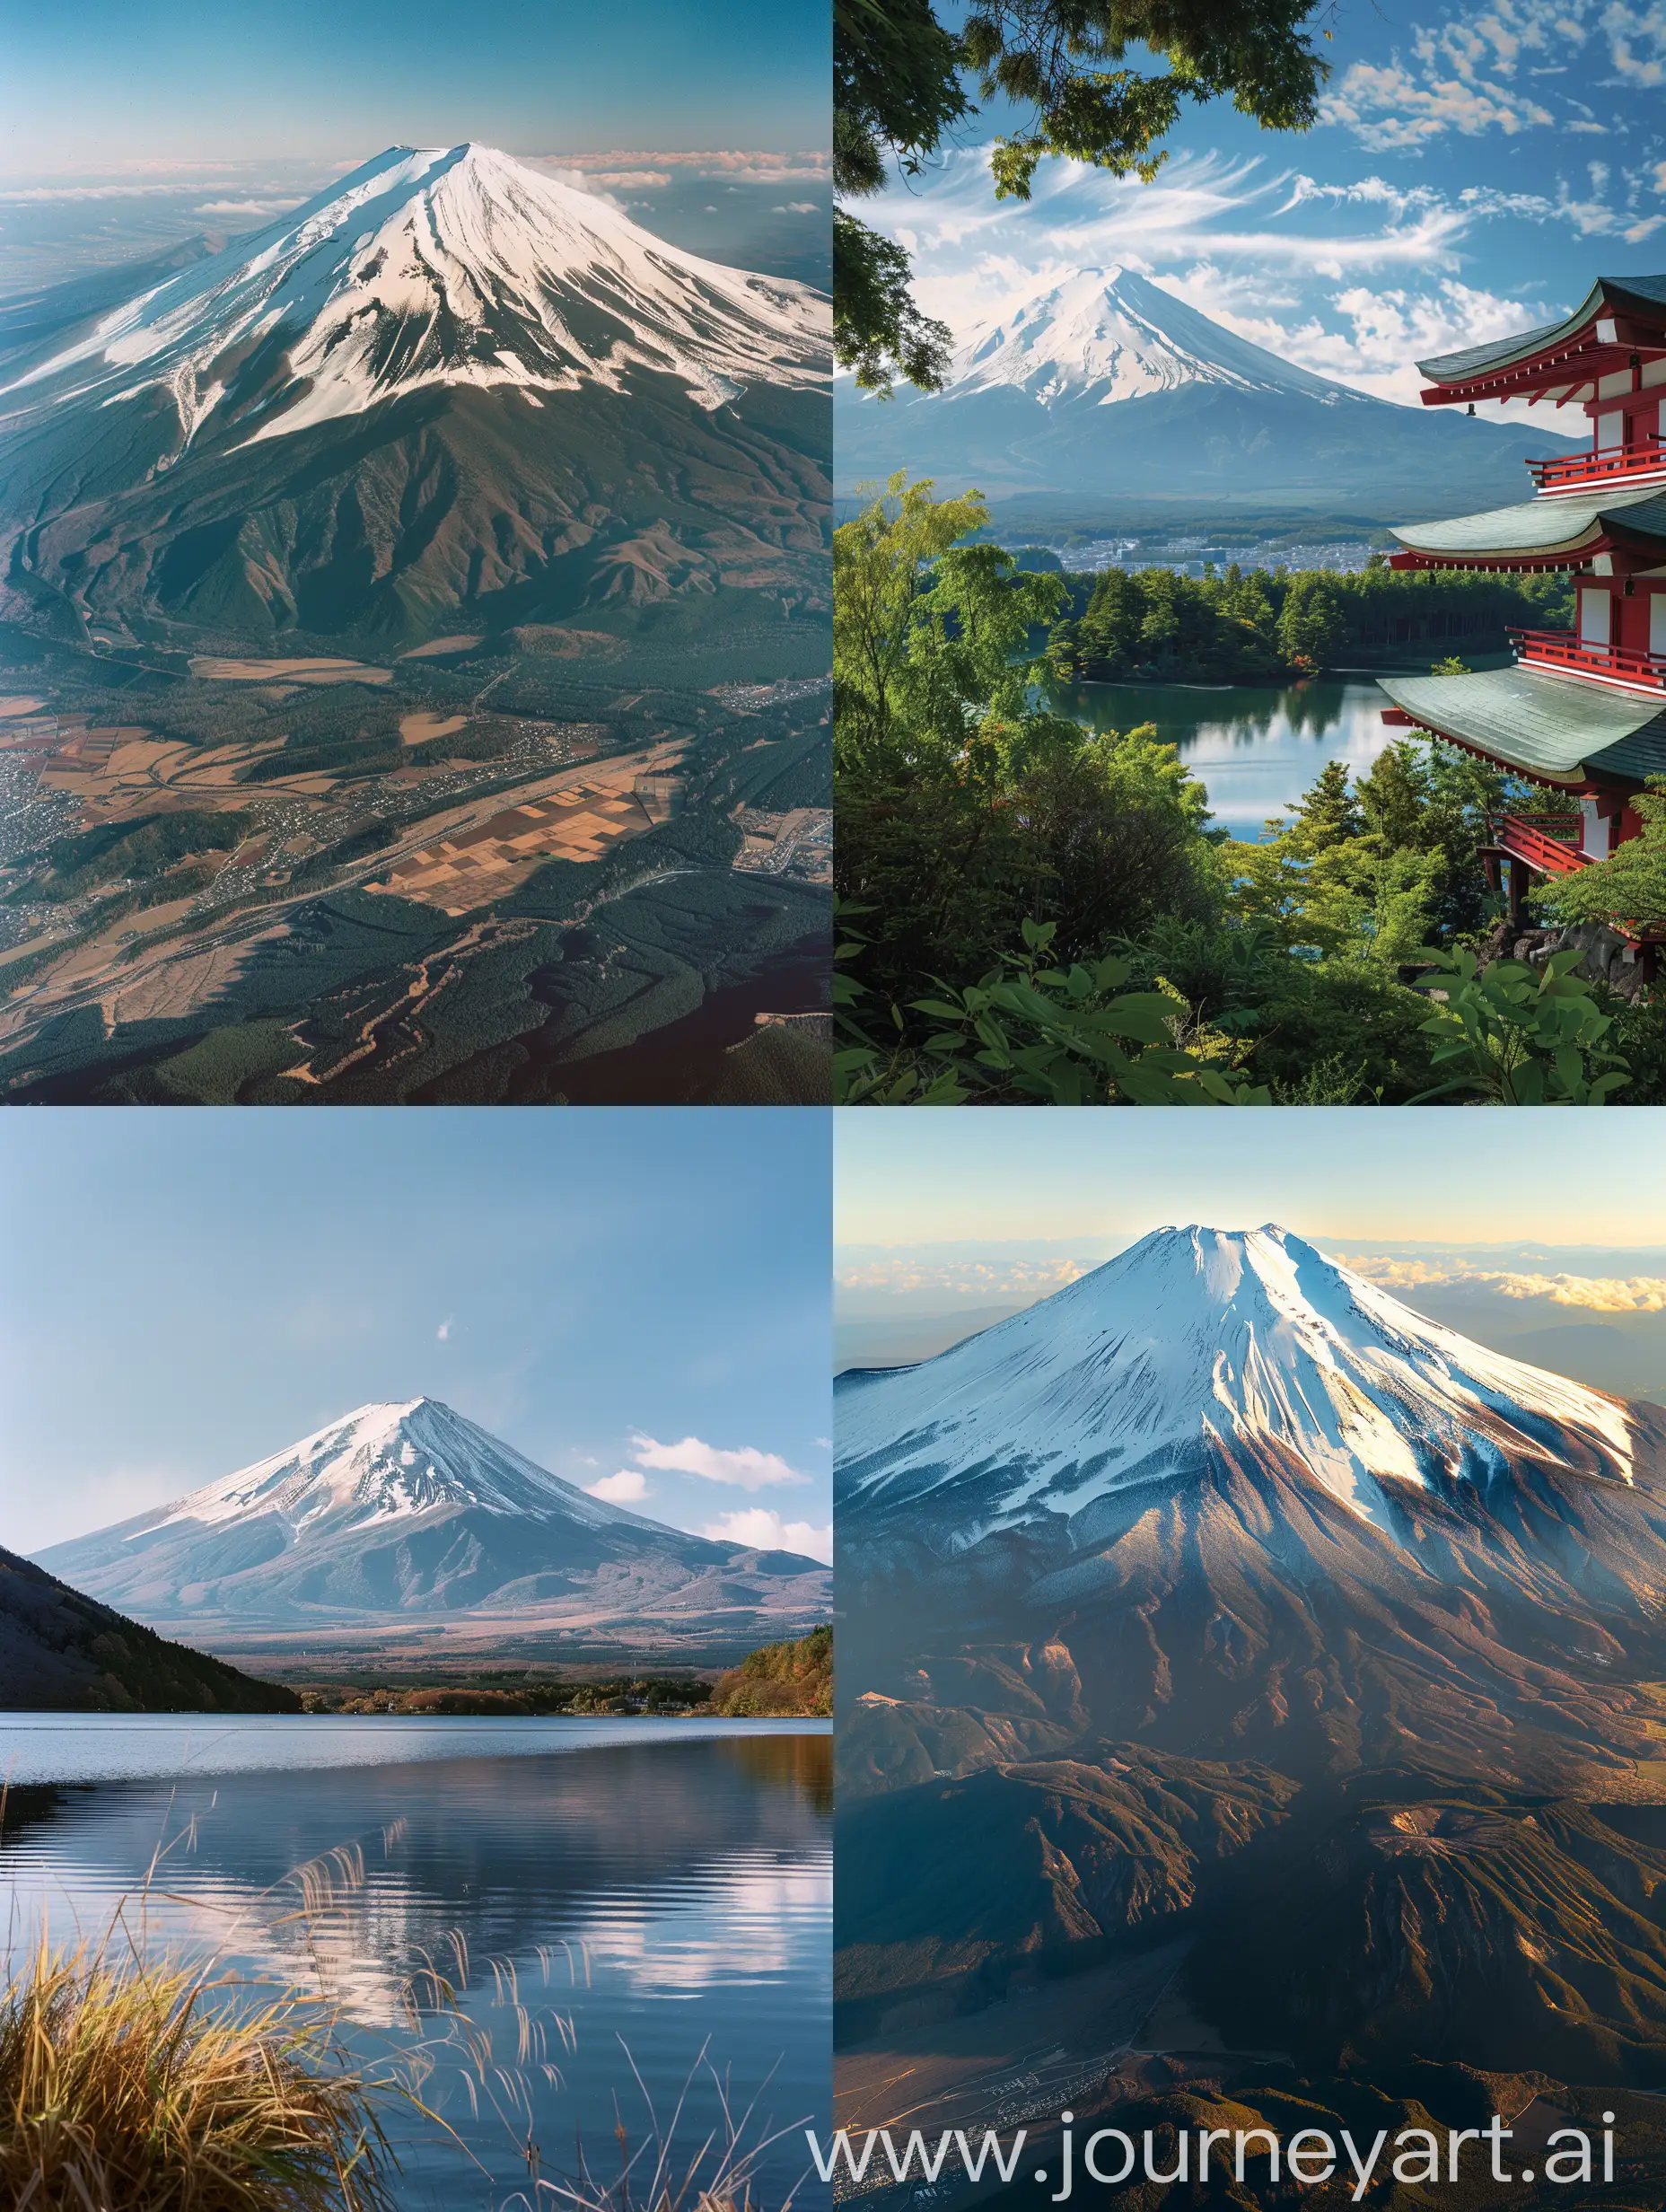 Mount Fuji vision, Hasselblad lens, extreme clarity, high resolution, natural light, rich details, bright colors, distinct layers, strong texture, excellent photography.